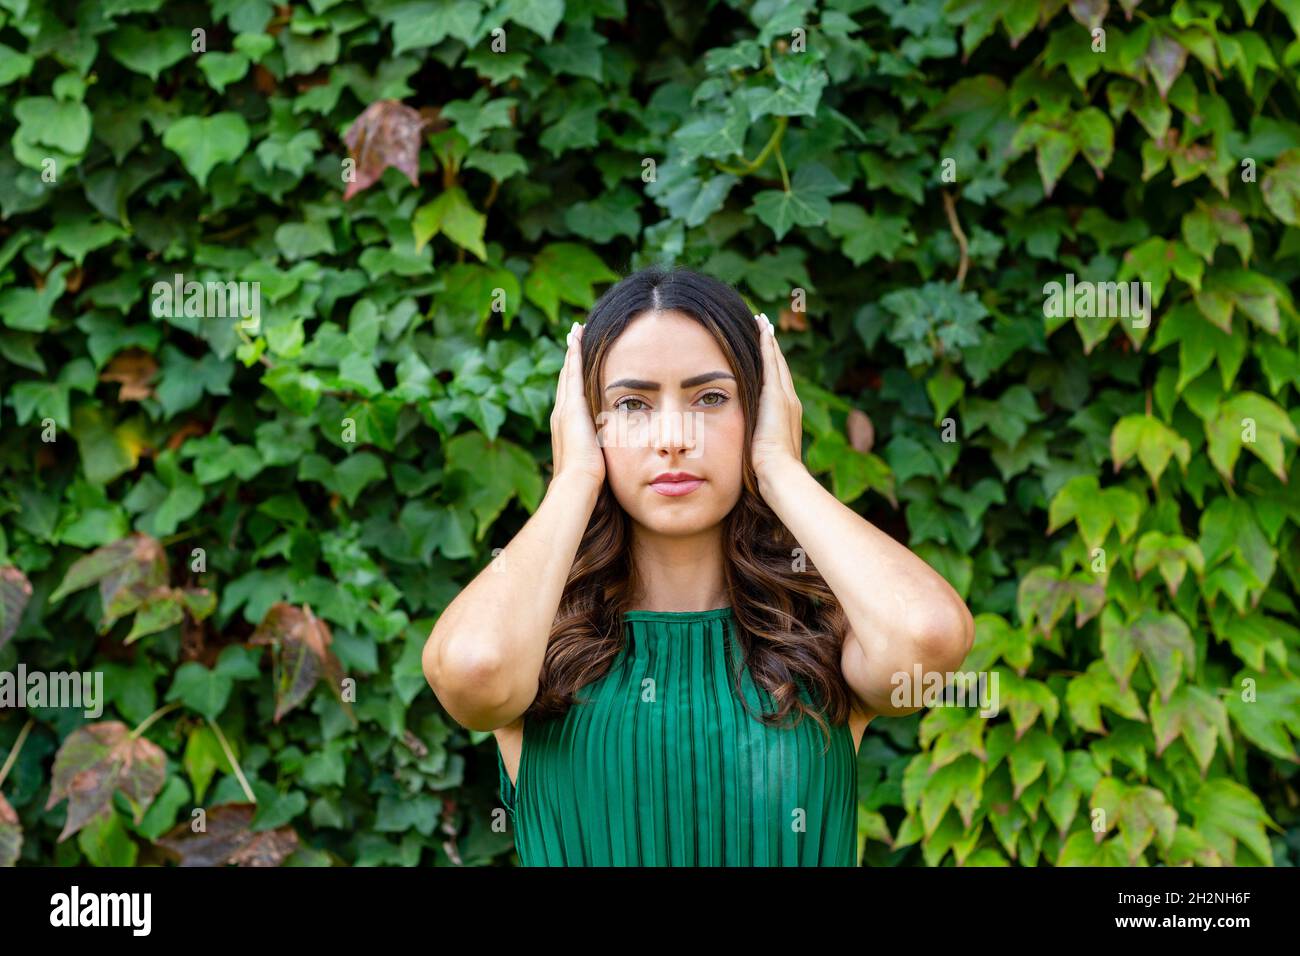 Beautiful woman covering ears with hands in front of green ivy plants Stock Photo